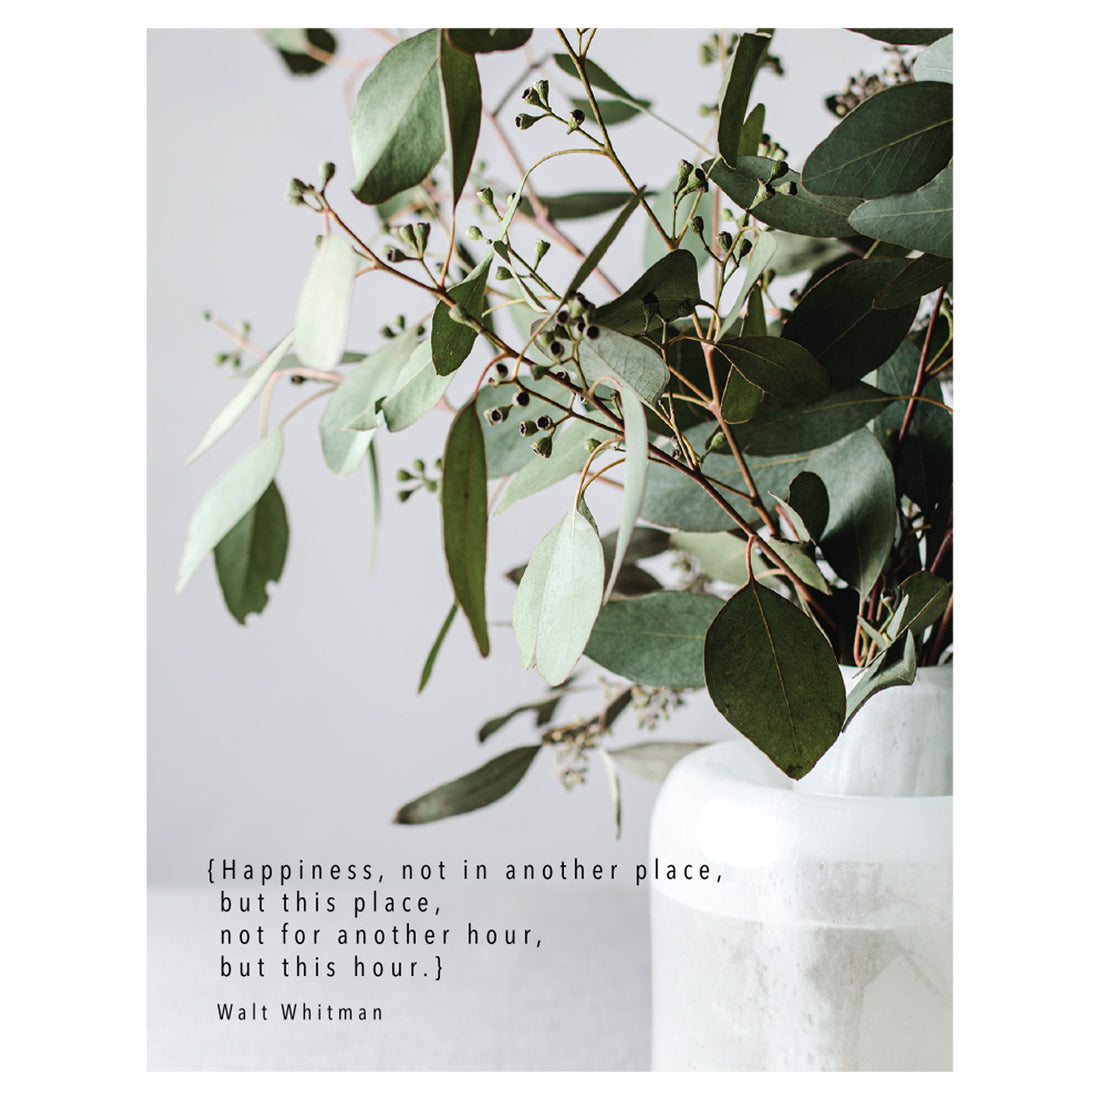 A photo of leafy botanicals in a white vase on a white background, with &quot;{Happiness, not in another place, but this place, not for another hour, but this hour.} Walt Whitman&quot; printed in black to the left of the vase.